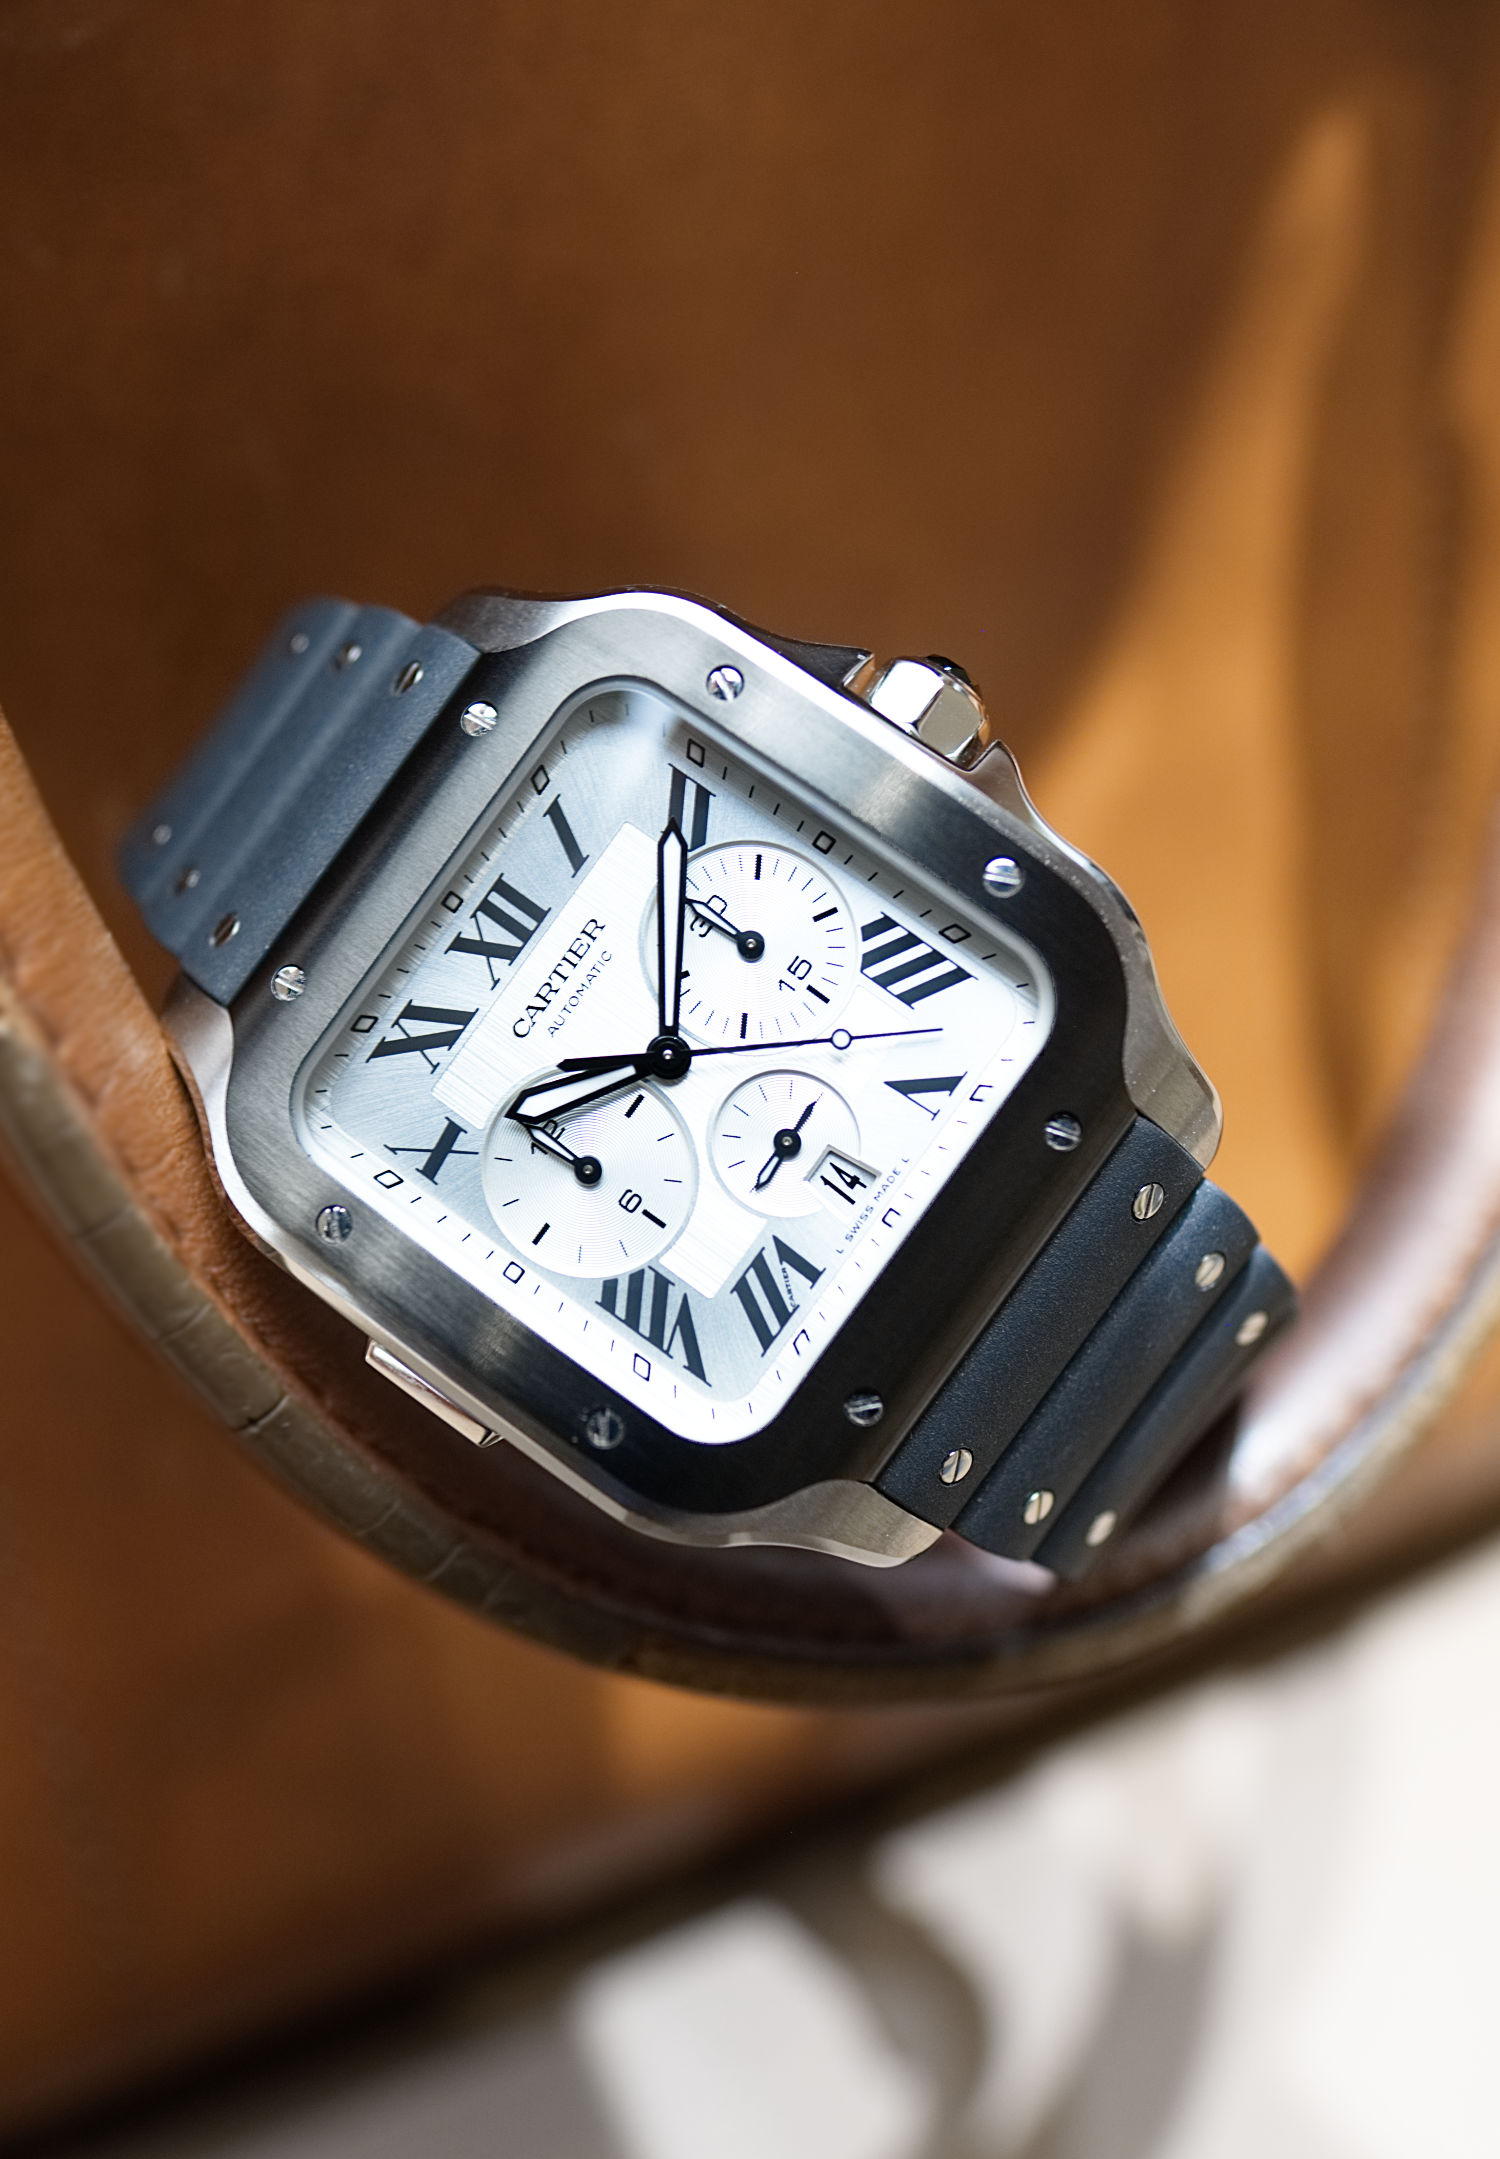 Cartier's Age of Santos - The Hour Glass S&S